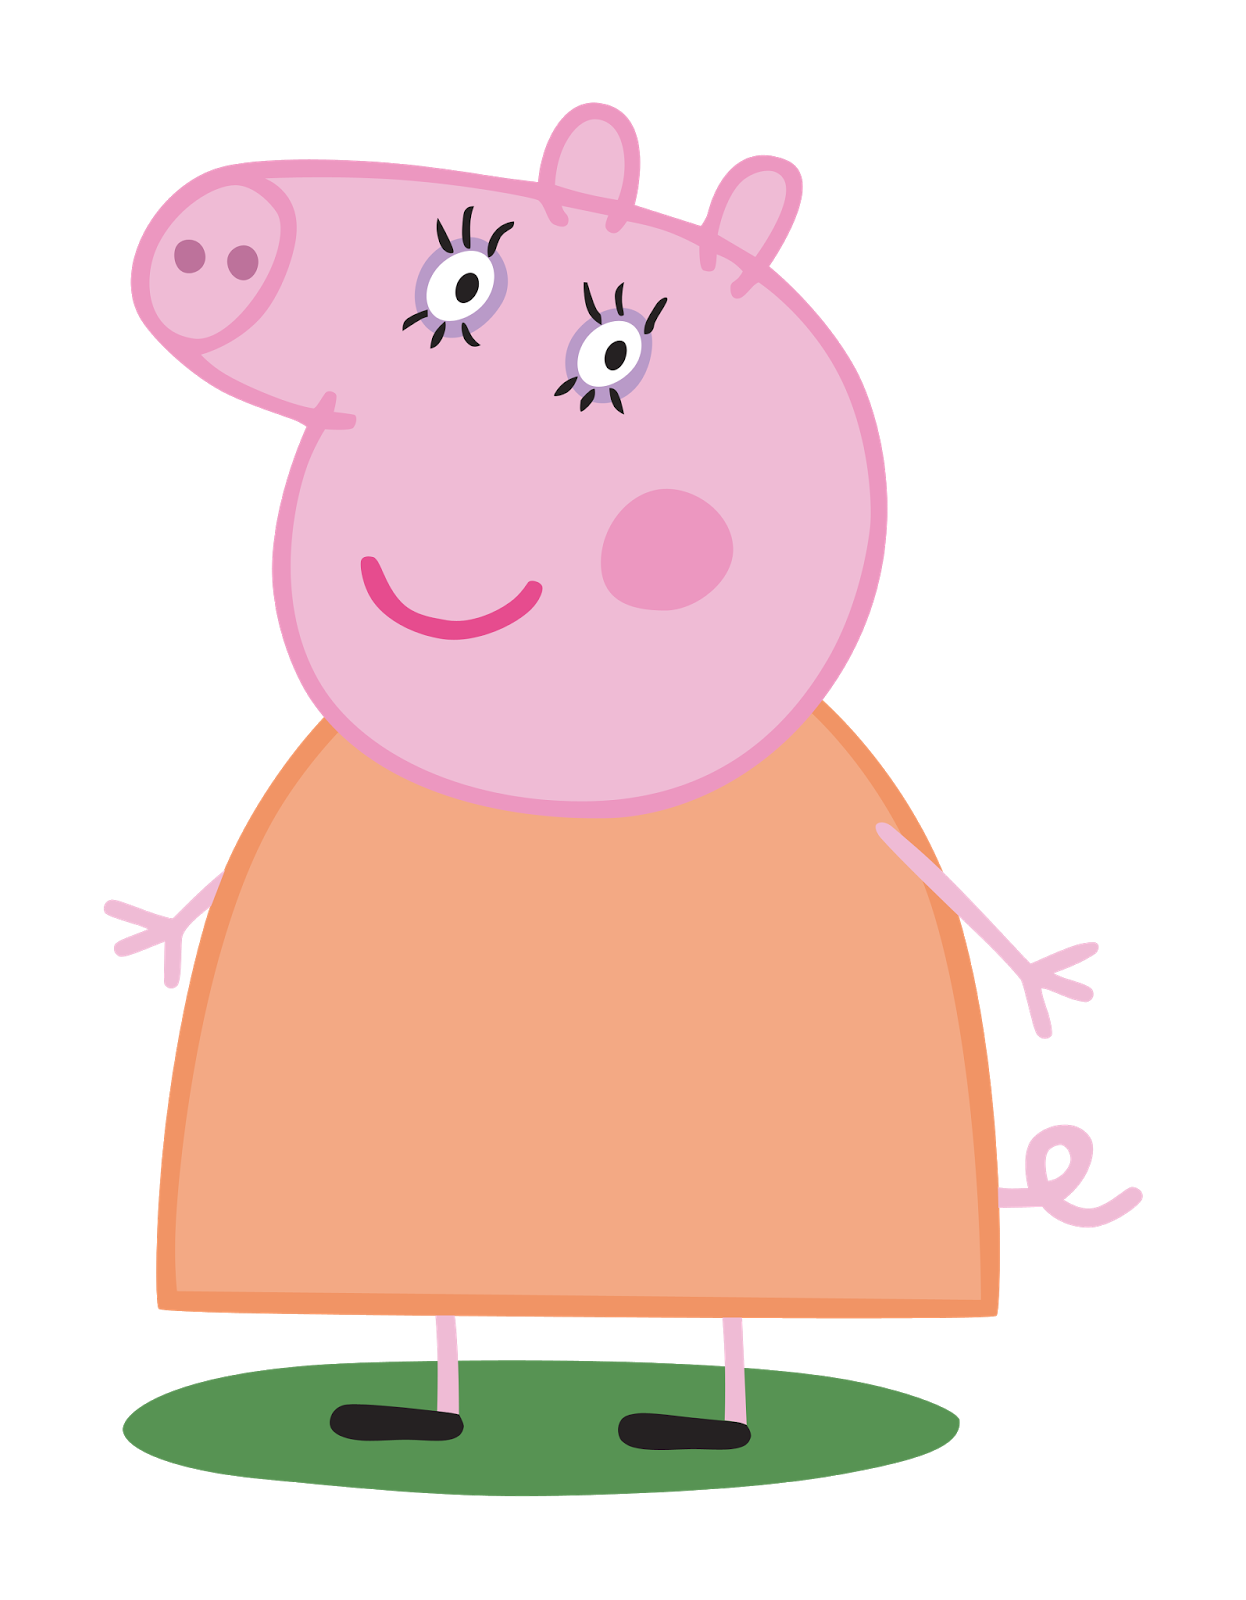 Shy clipart piglet. Personajes peppa pig png